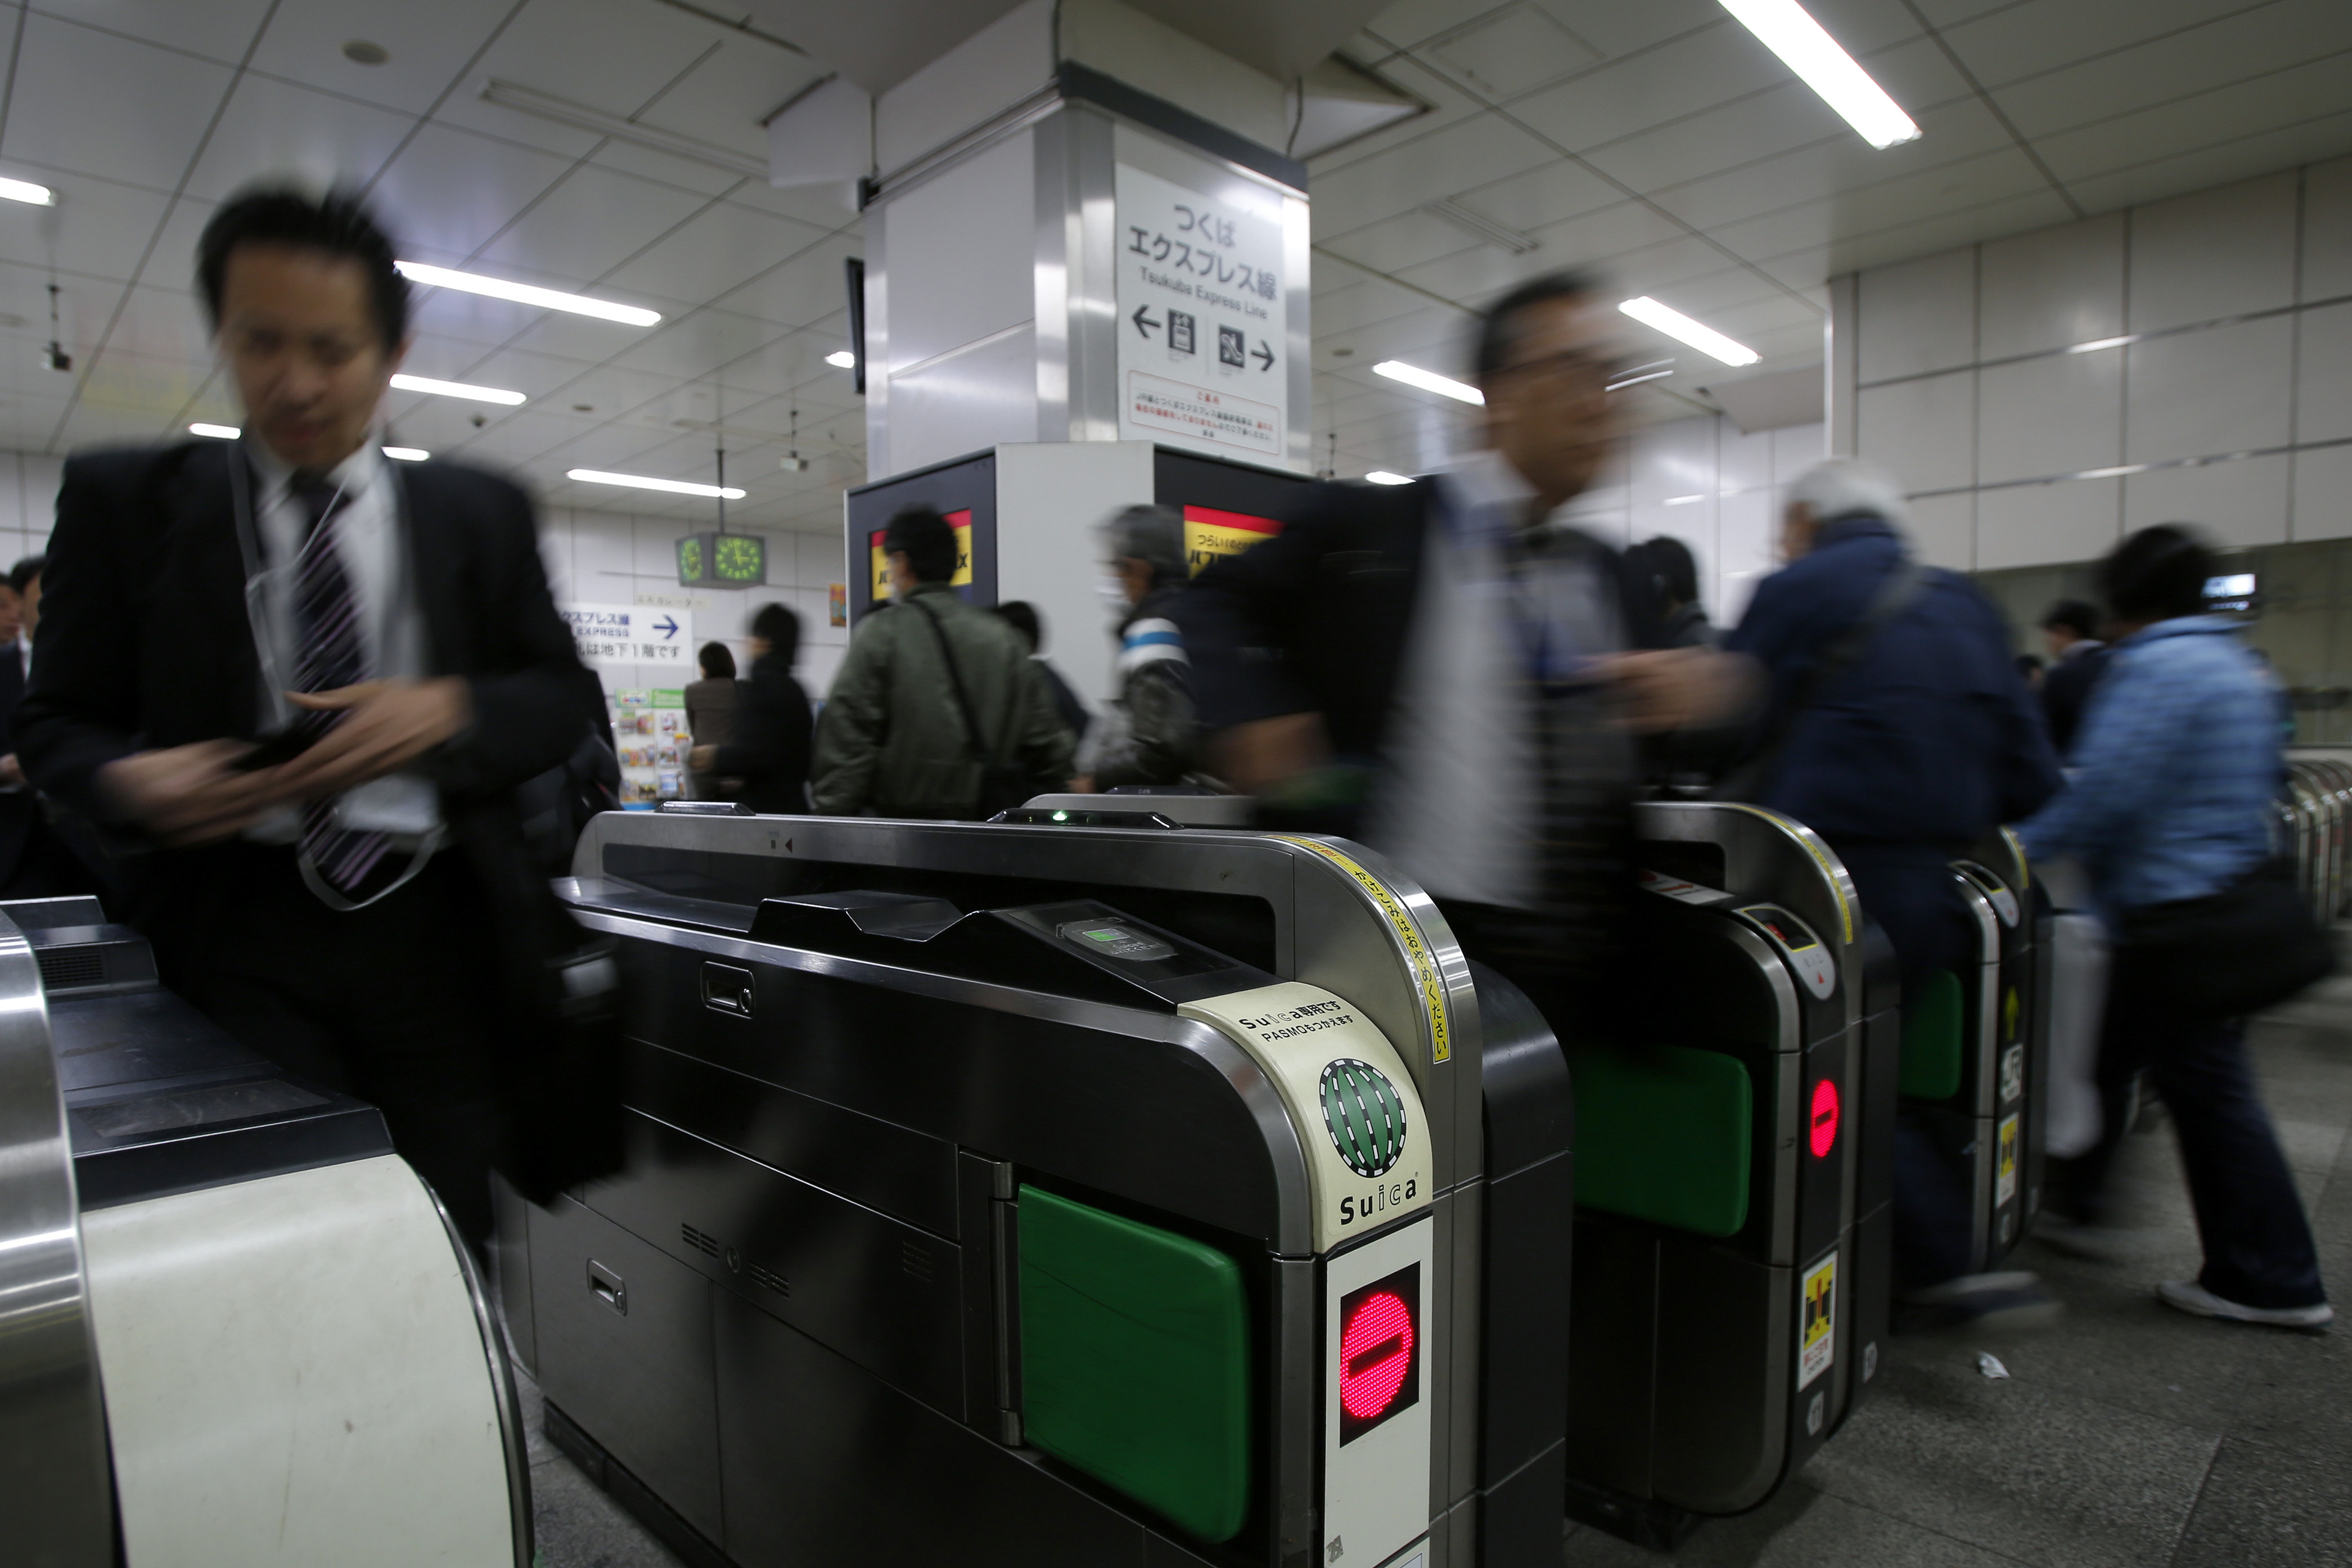 Pay as you go: People pass through ticket gates at a Tokyo train station on Nov. 13. | BLOOMBERG